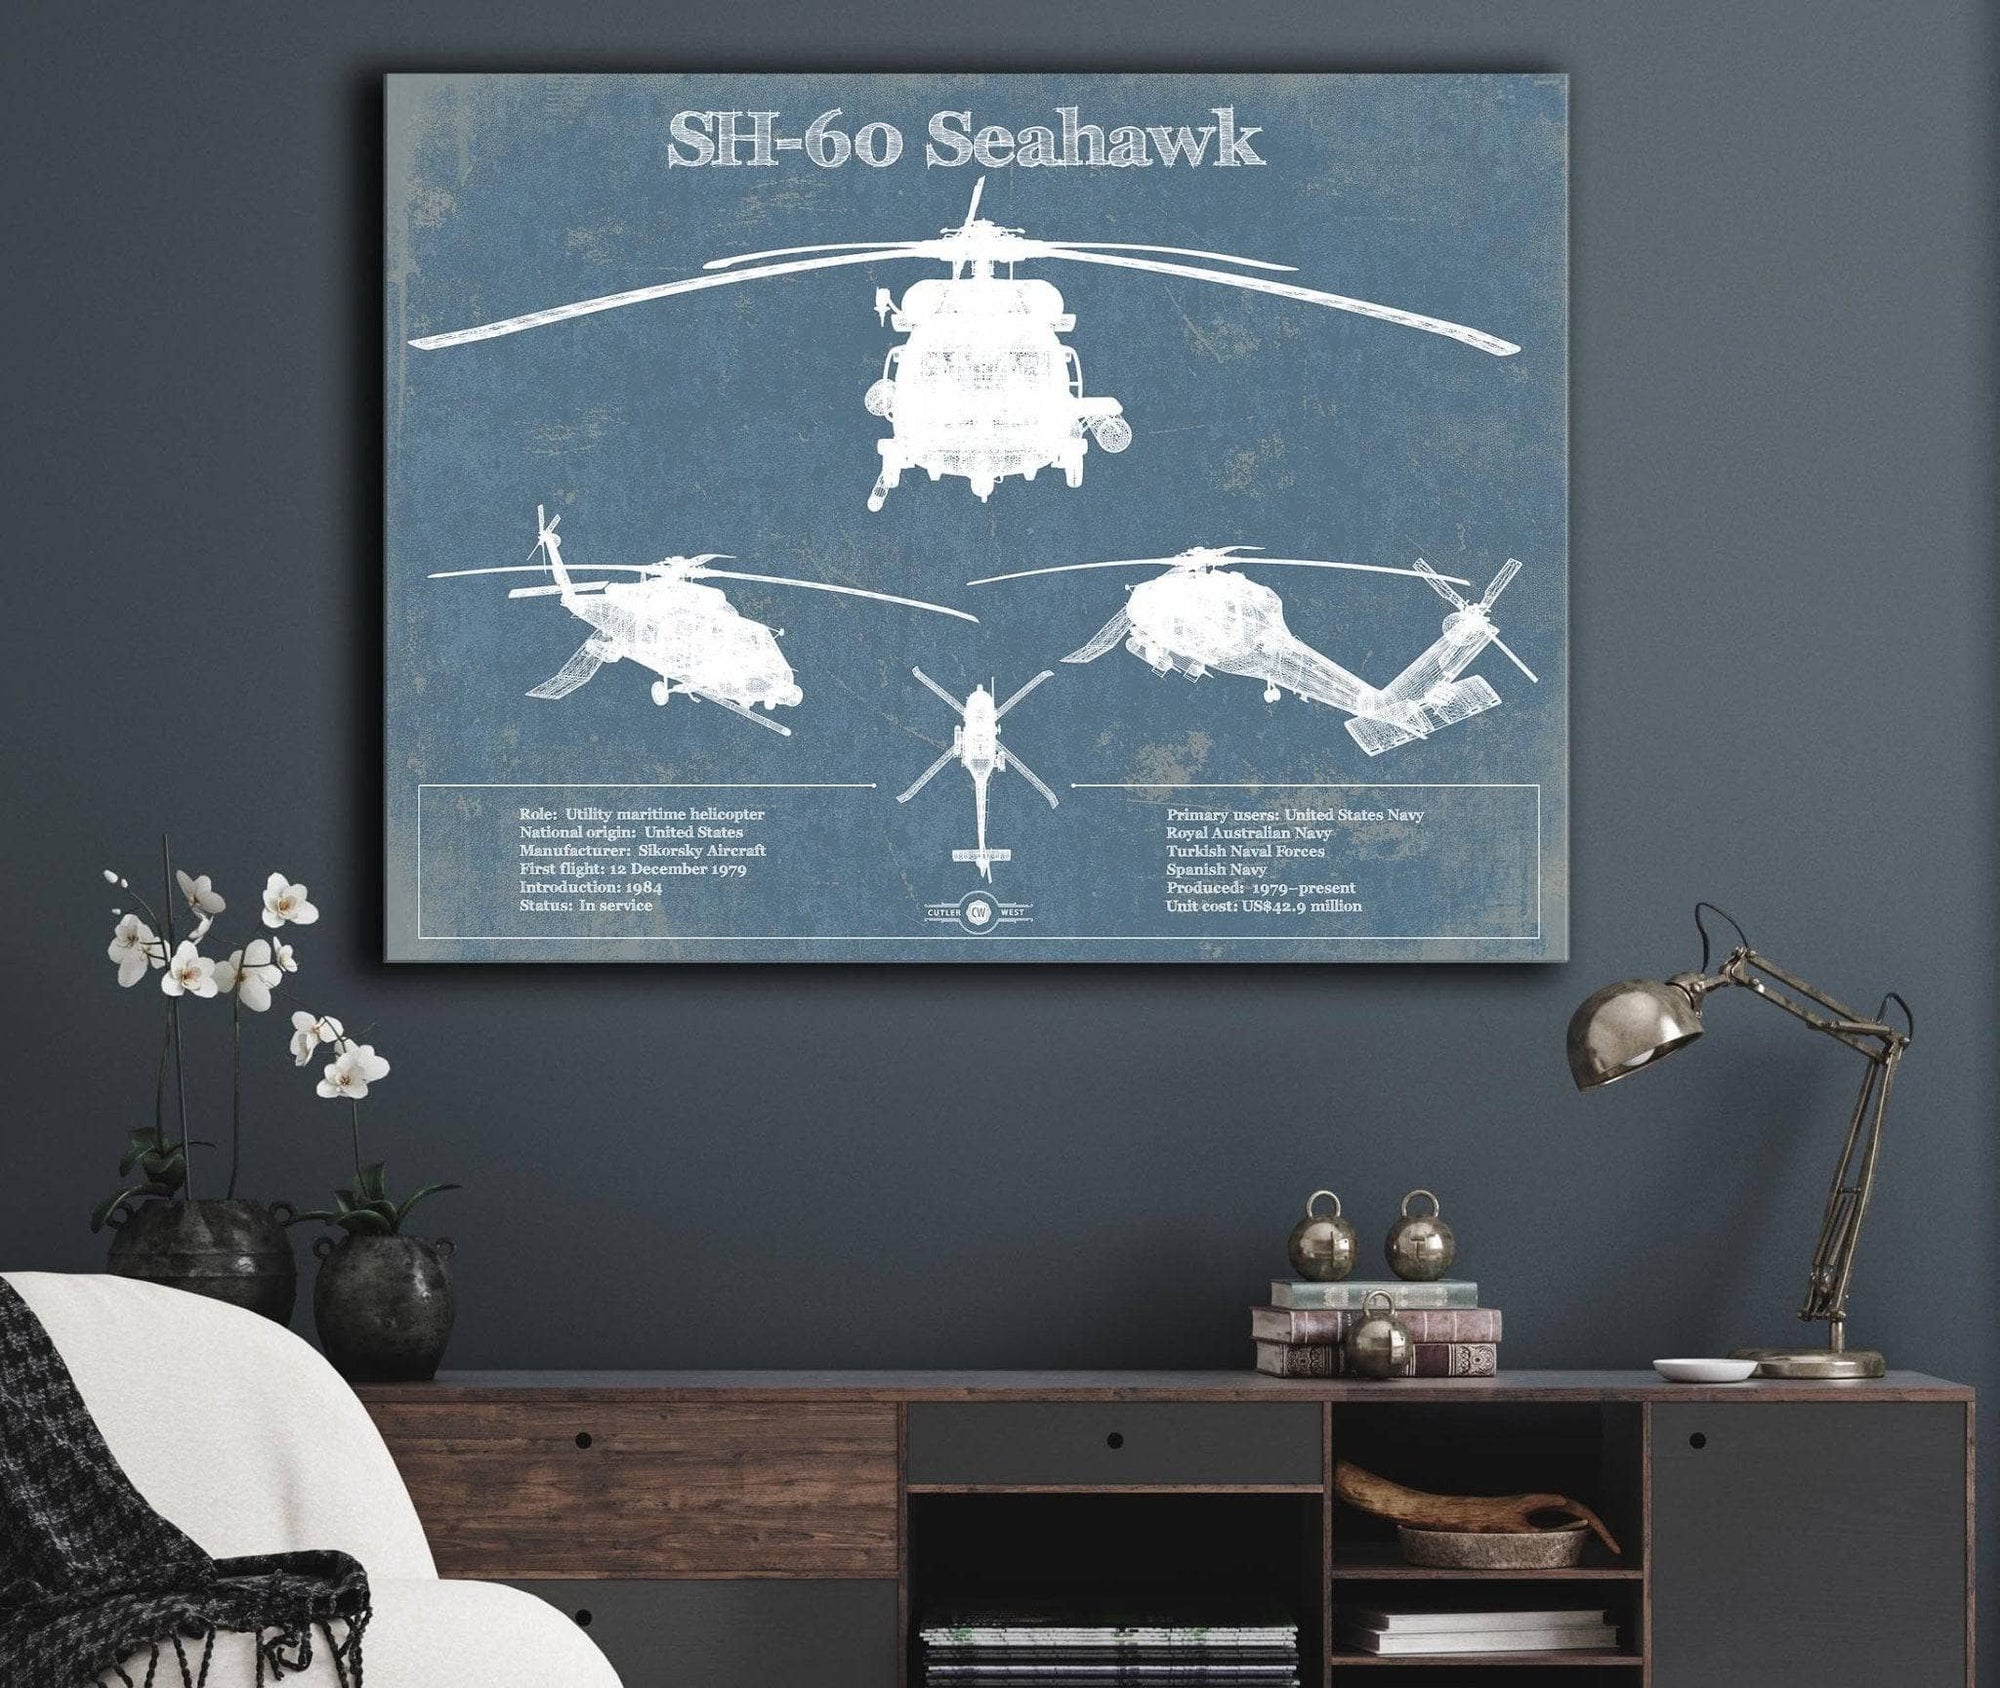 Cutler West Military Aircraft SH-60/MH-60 Seahawk Helicopter Vintage Aviation Blueprint Military Print